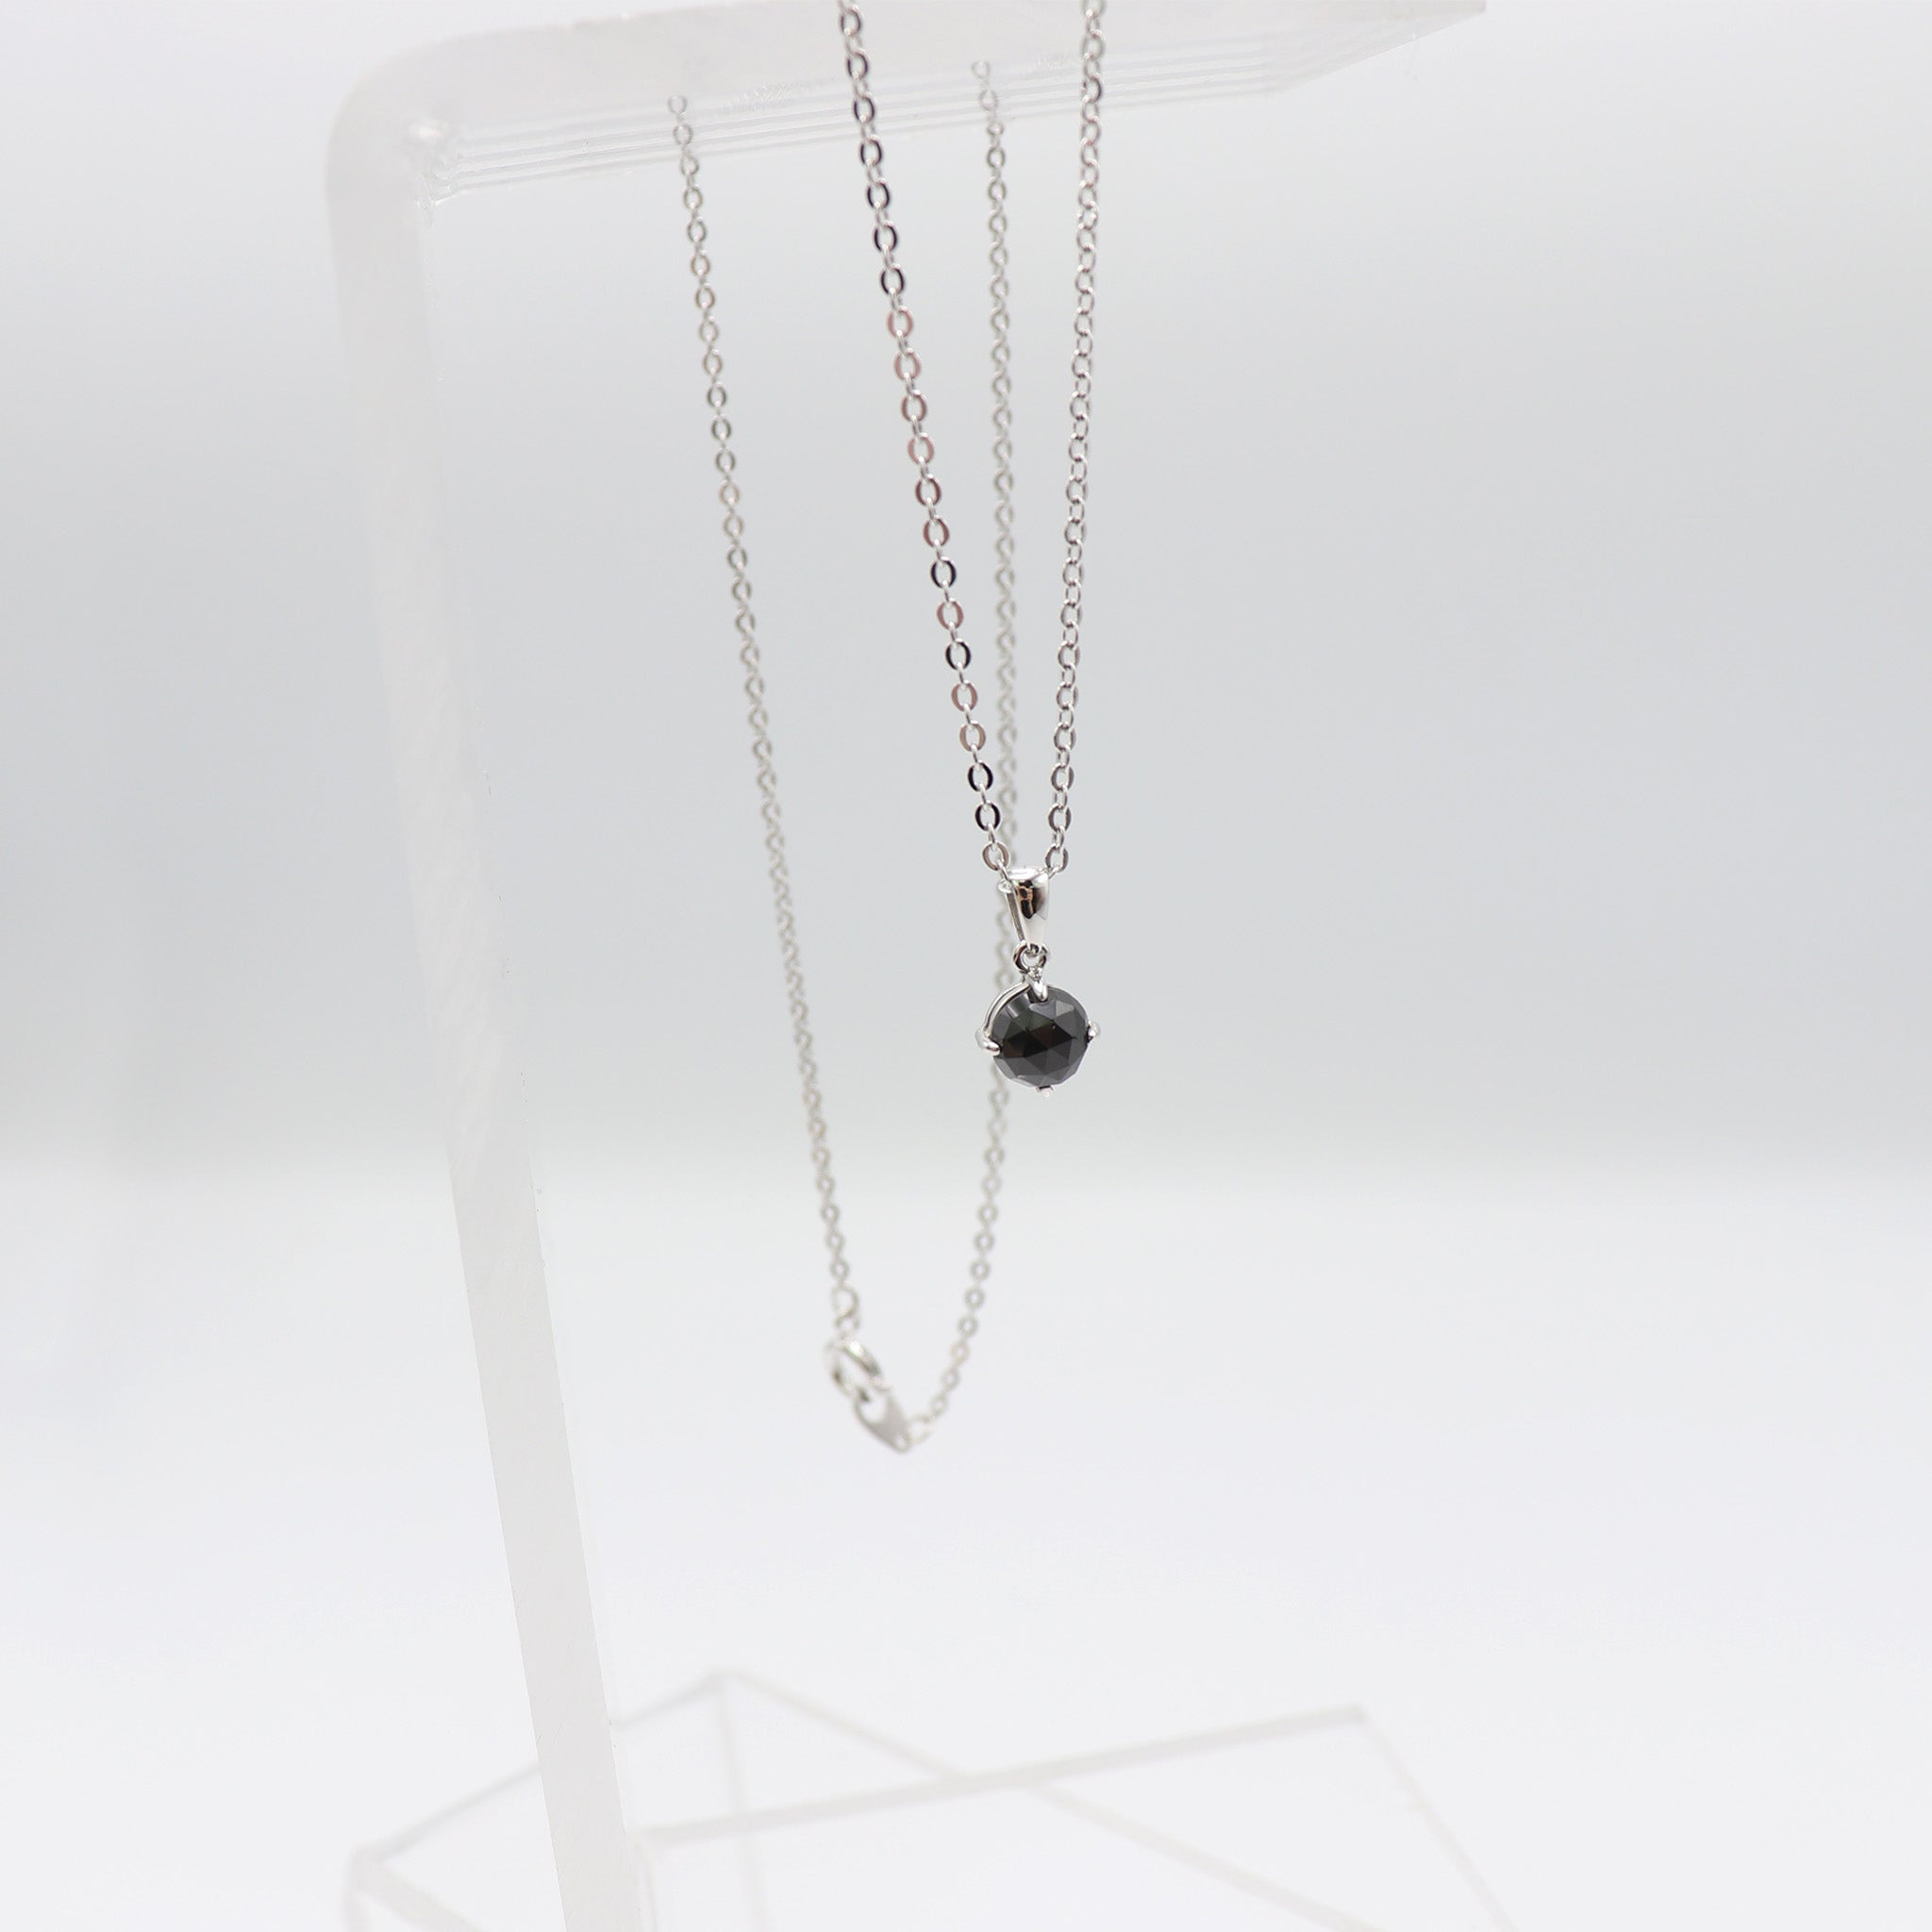 Black Spinel with Rose Cut 1Ct Pendant Necklace